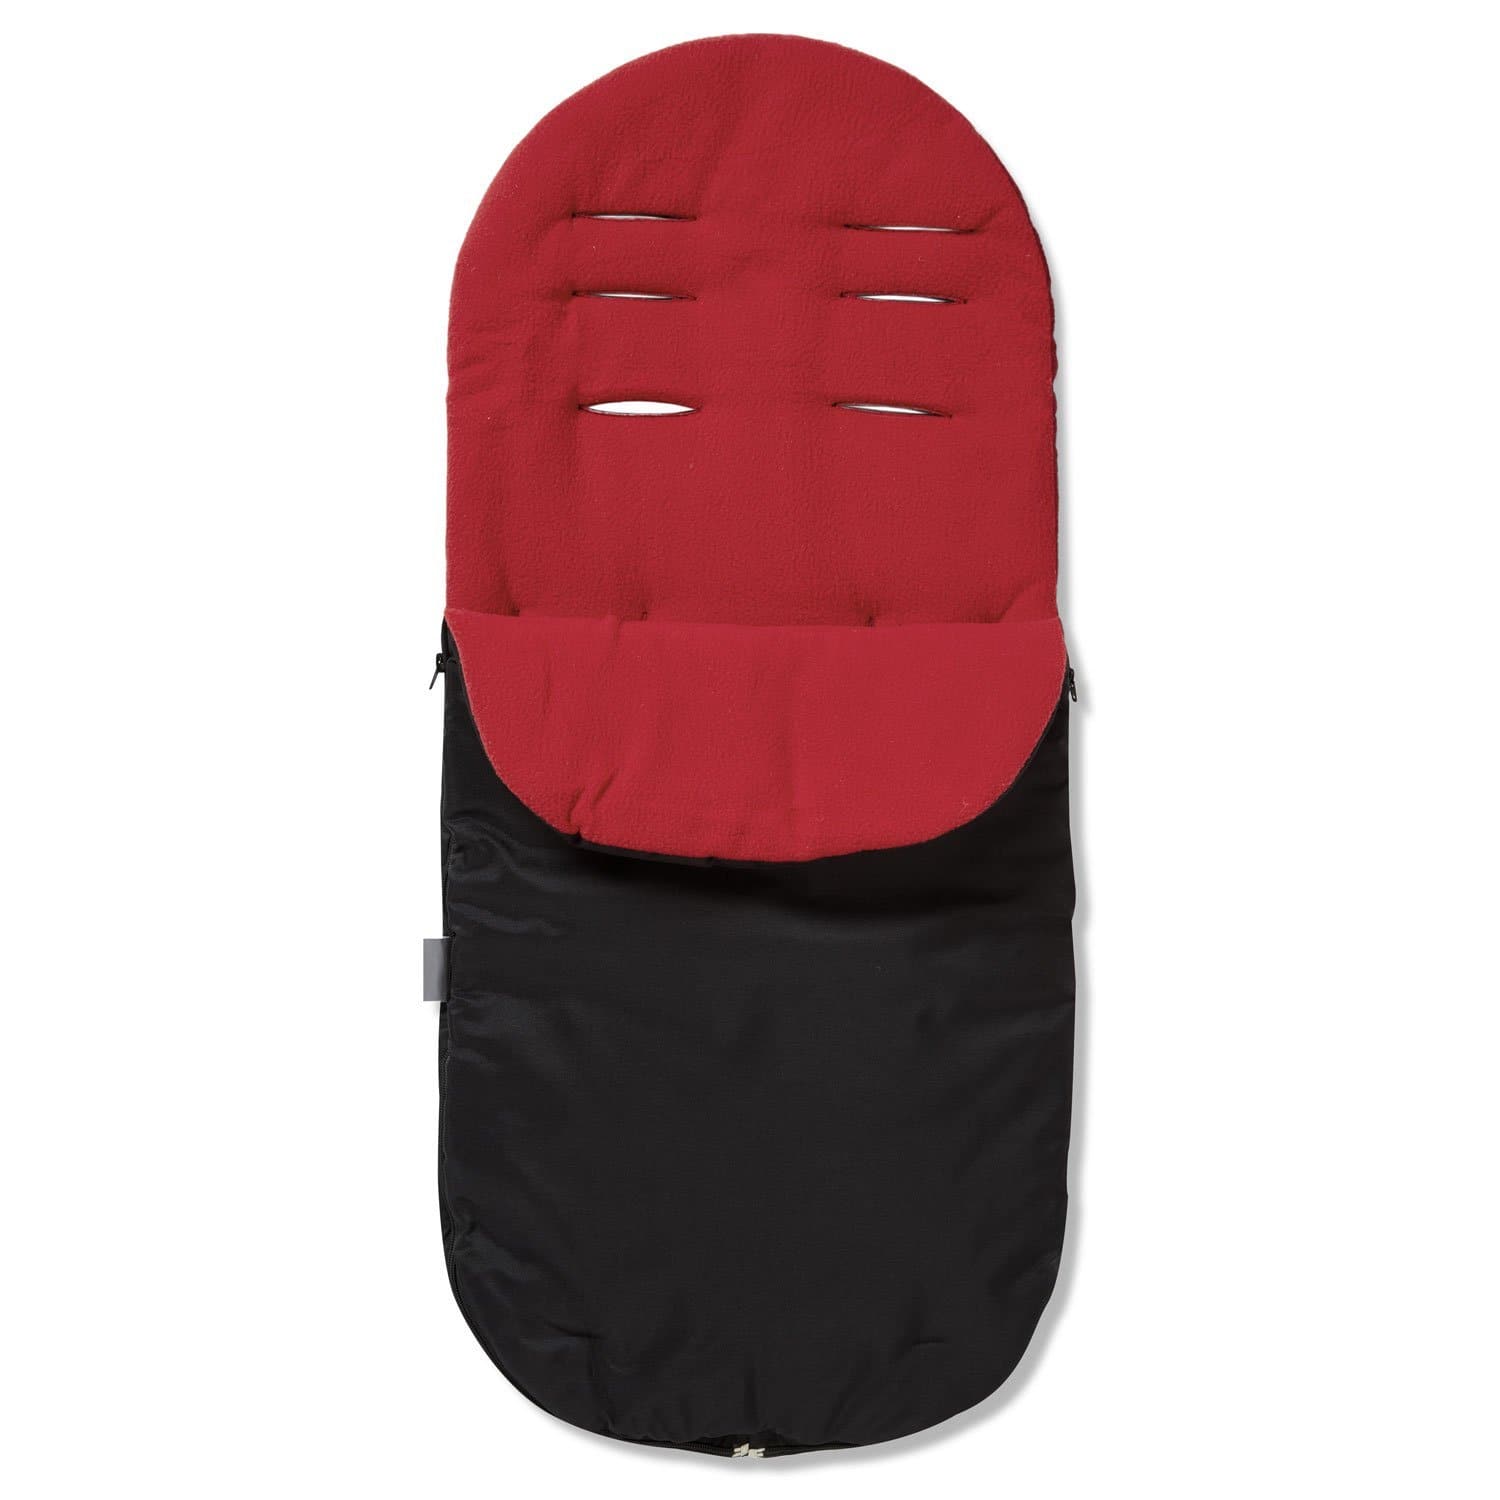 Footmuff / Cosy Toes Compatible with XTS - Red / Fits All Models | For Your Little One